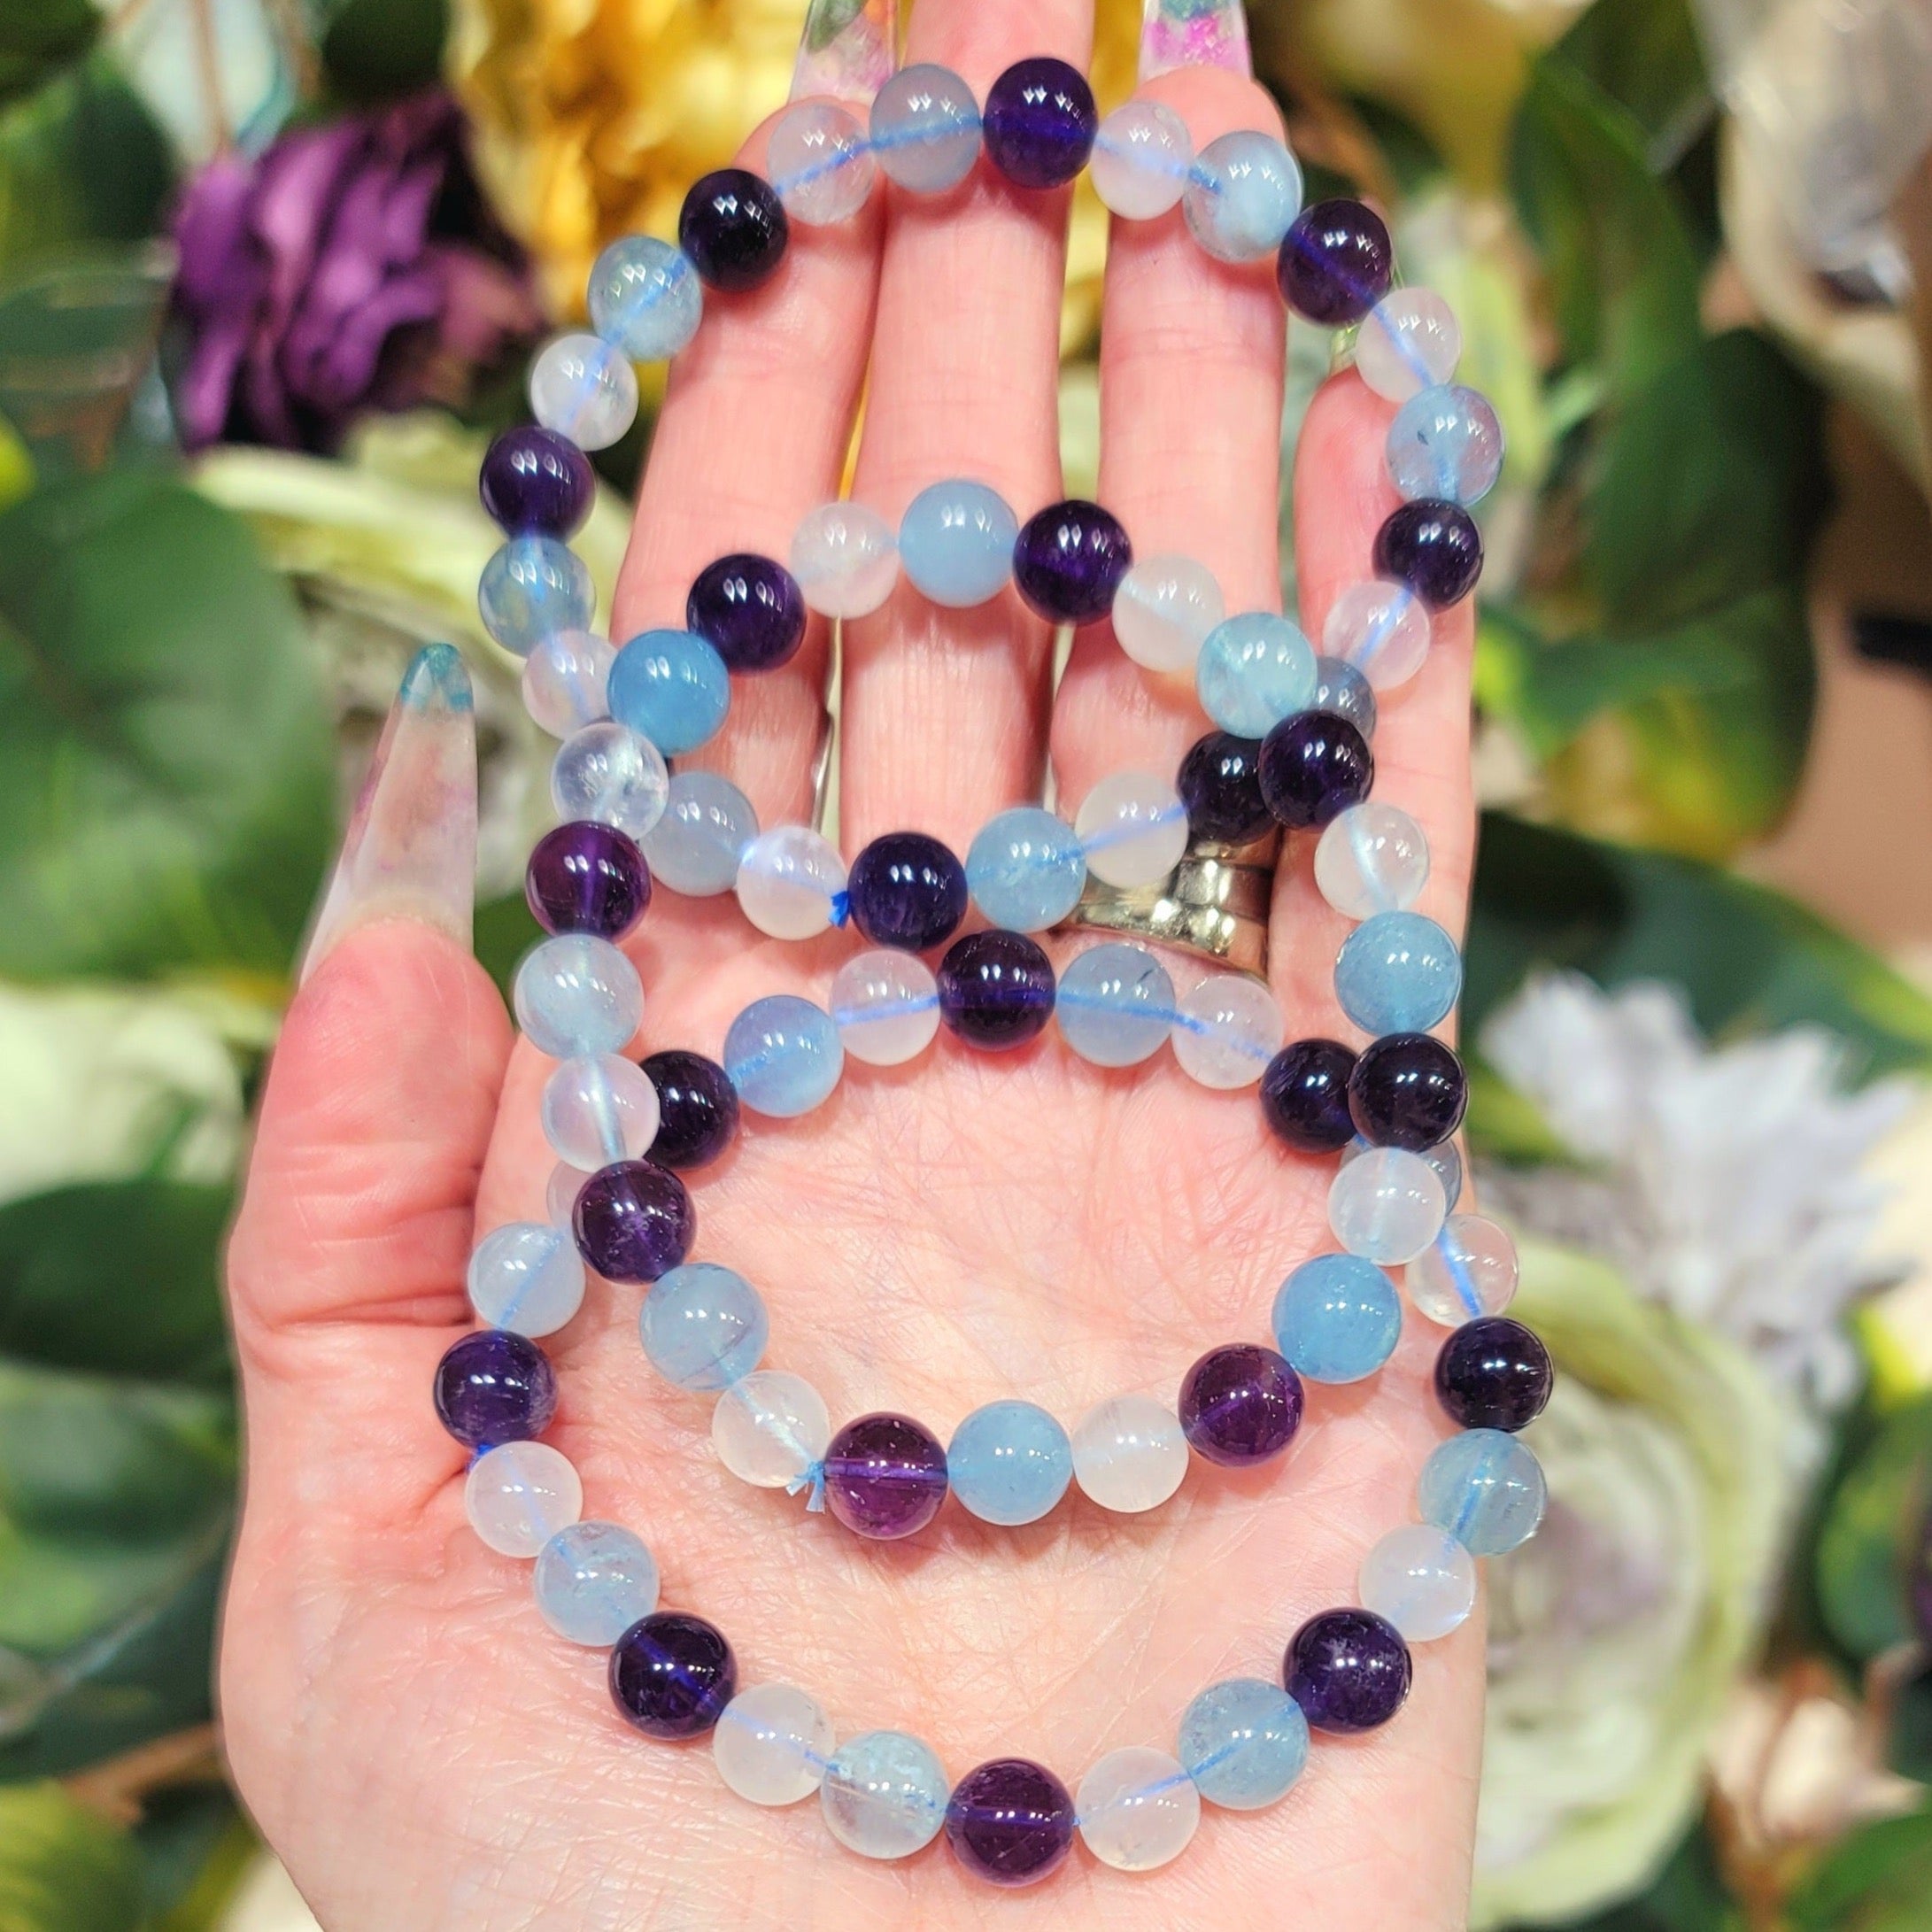 Pisces Bracelet (Amethyst, Aquamarine and Rainbow Moonstone) *High Quality* for Empowerment and Soothing Emotions